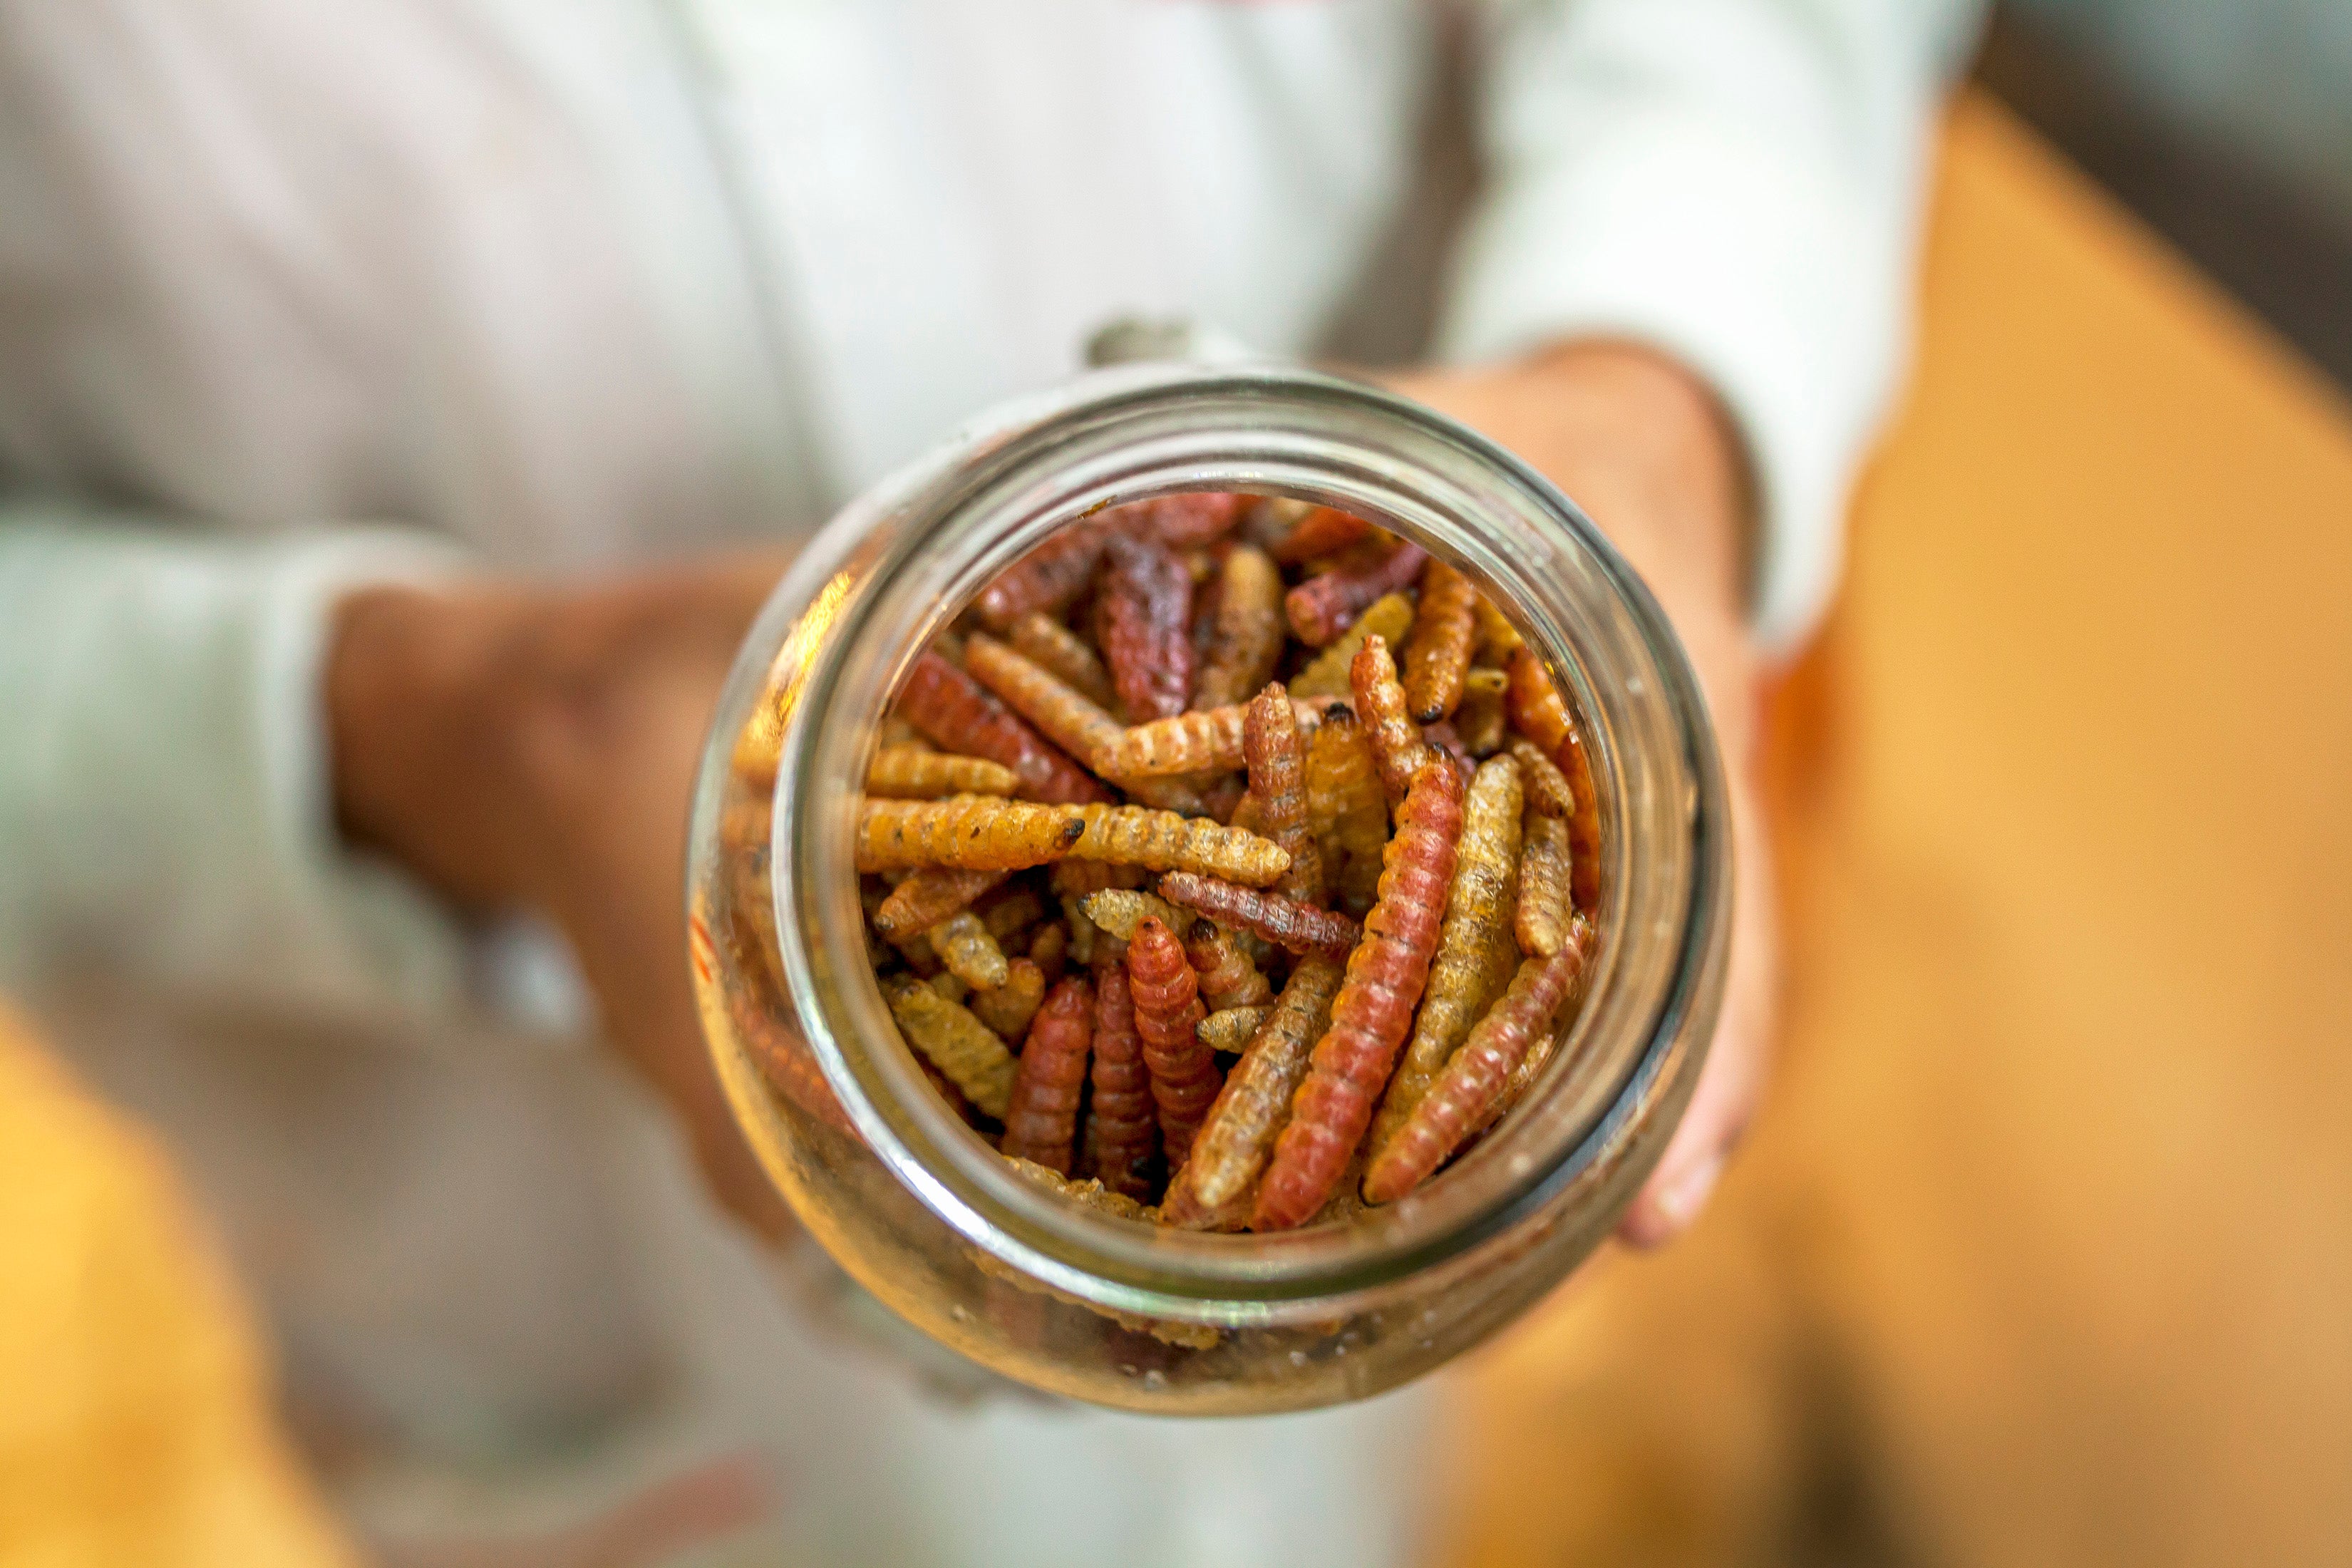 A jar of Comadia redtenbacheri larvae, which are sometimes added to mezcal bottles.